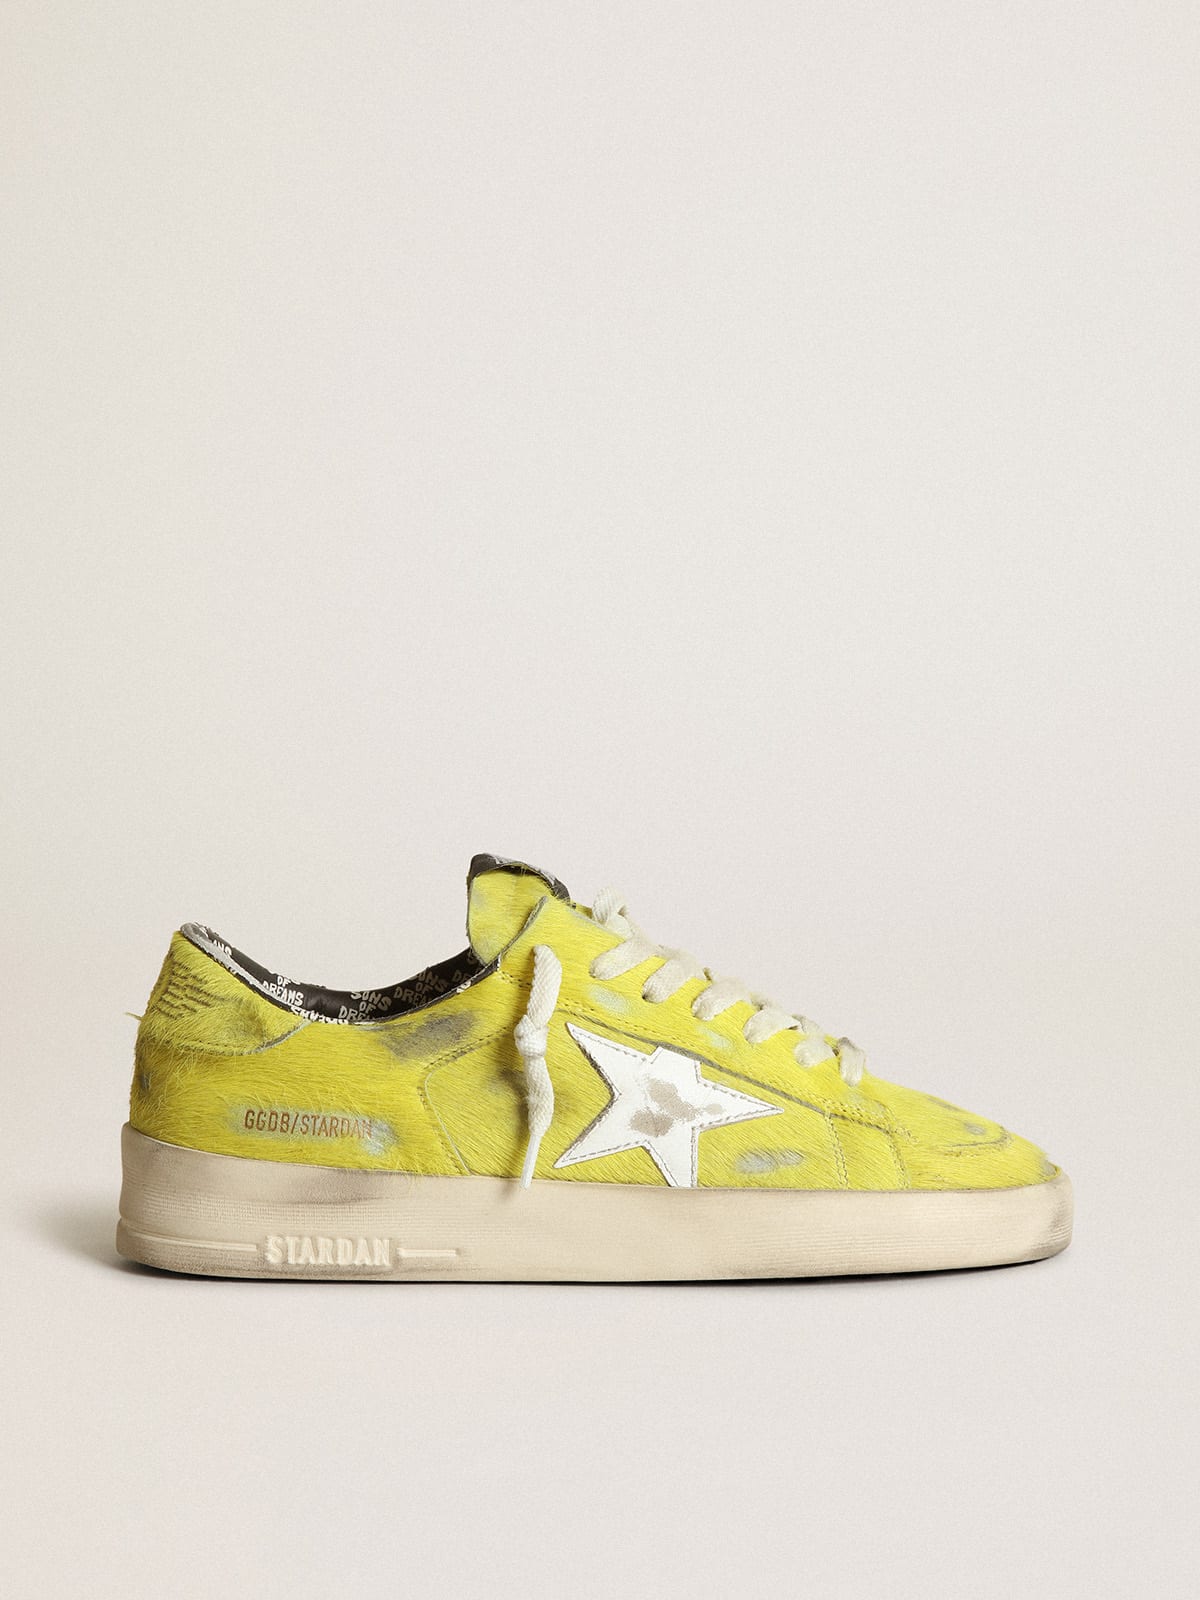 Women's Stardan sneakers in fluorescent yellow pony skin with white leather star